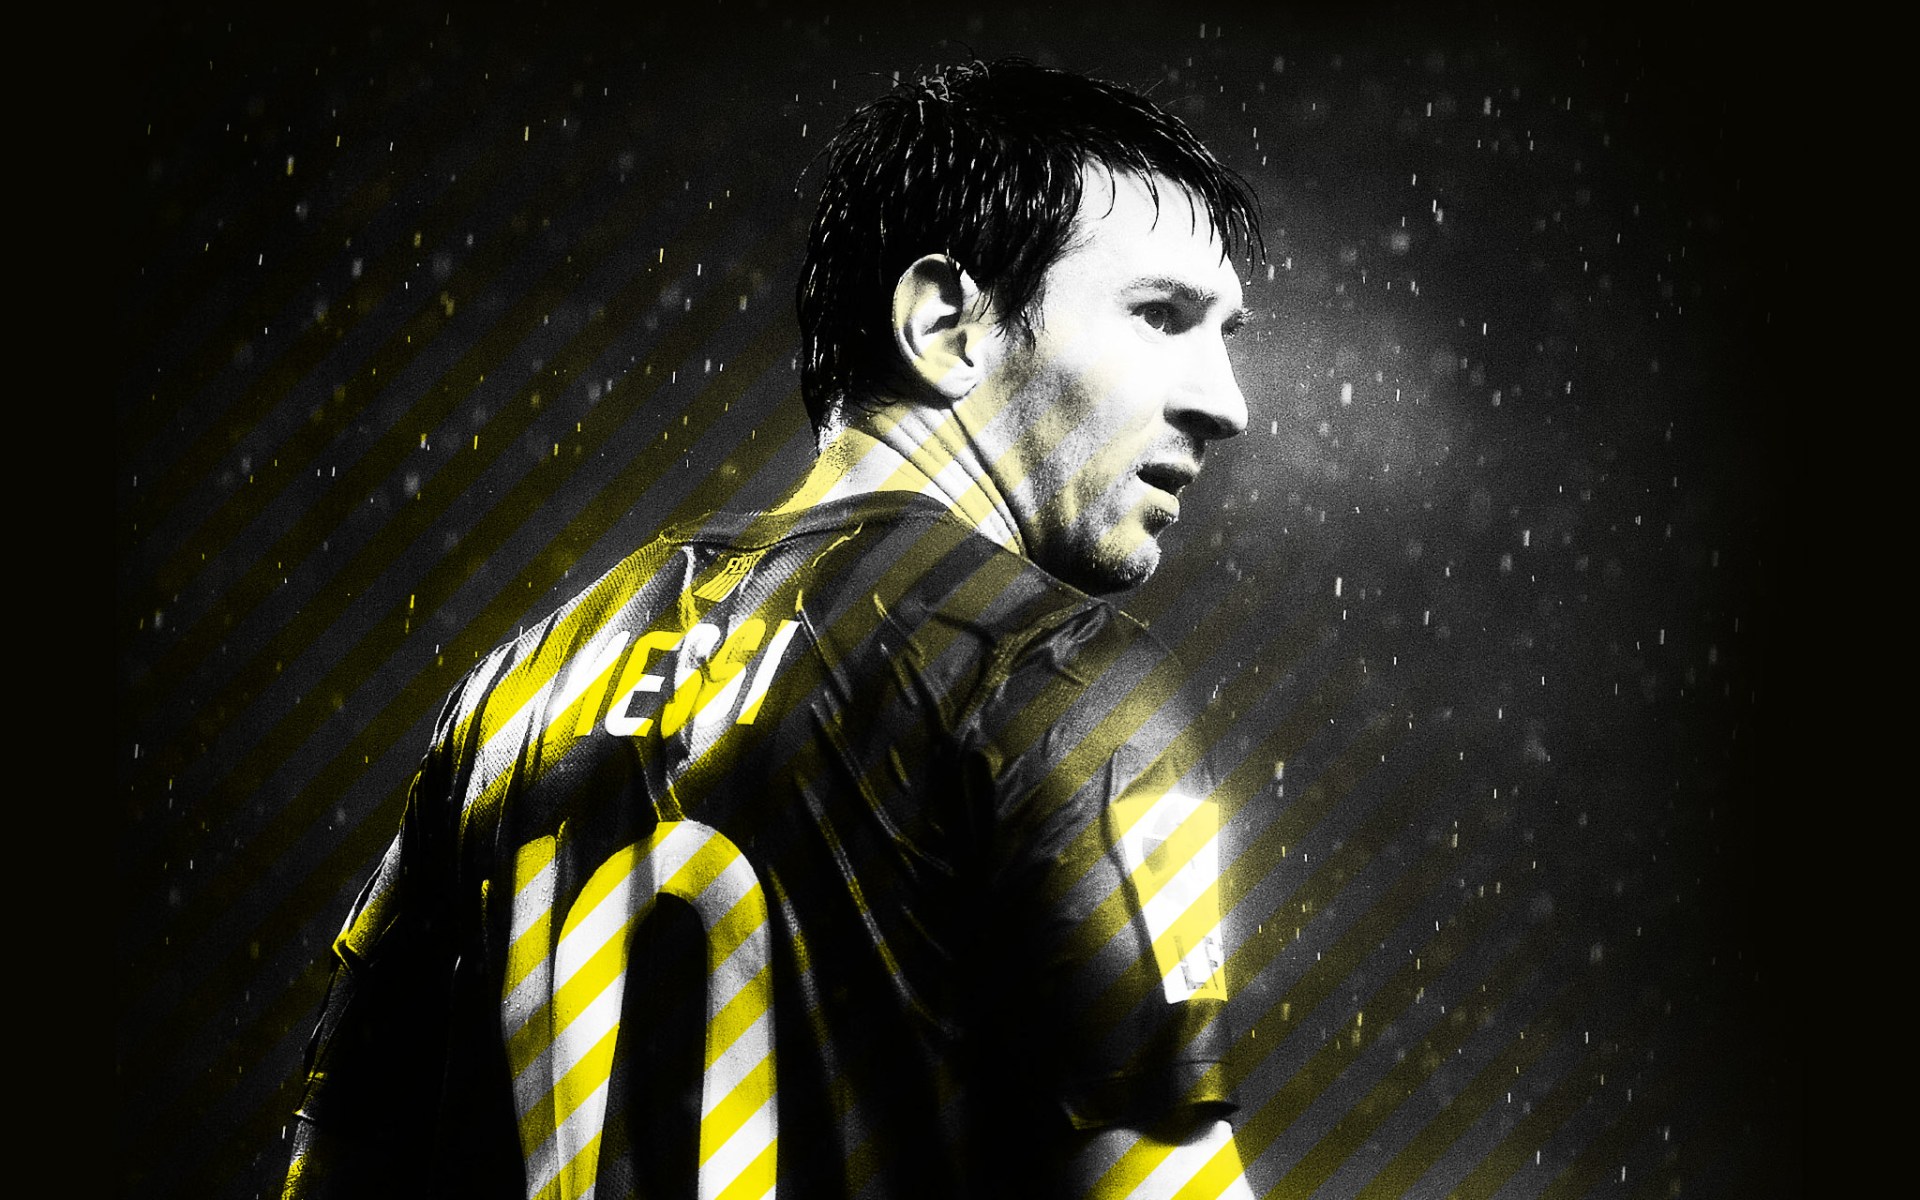  Messi 2014   Wallpaper High Definition High Quality Widescreen